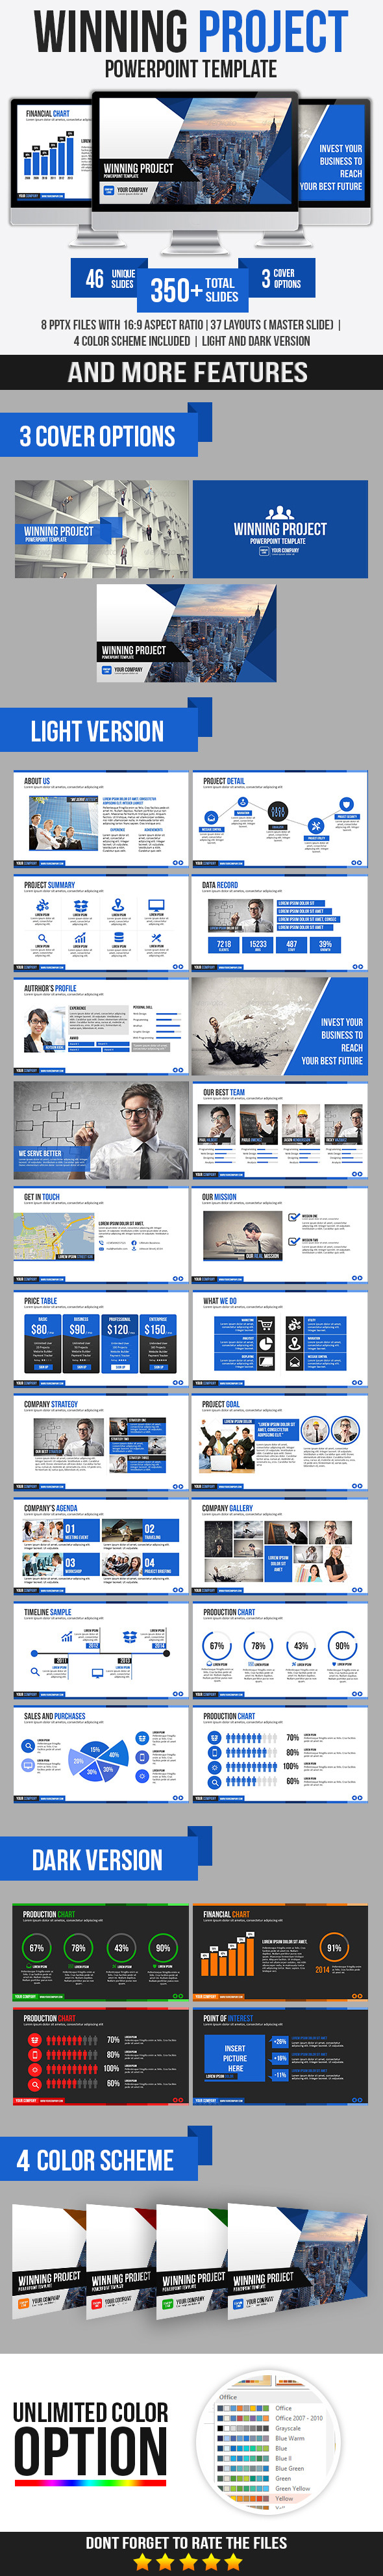 Winning Project PowerPoint Template